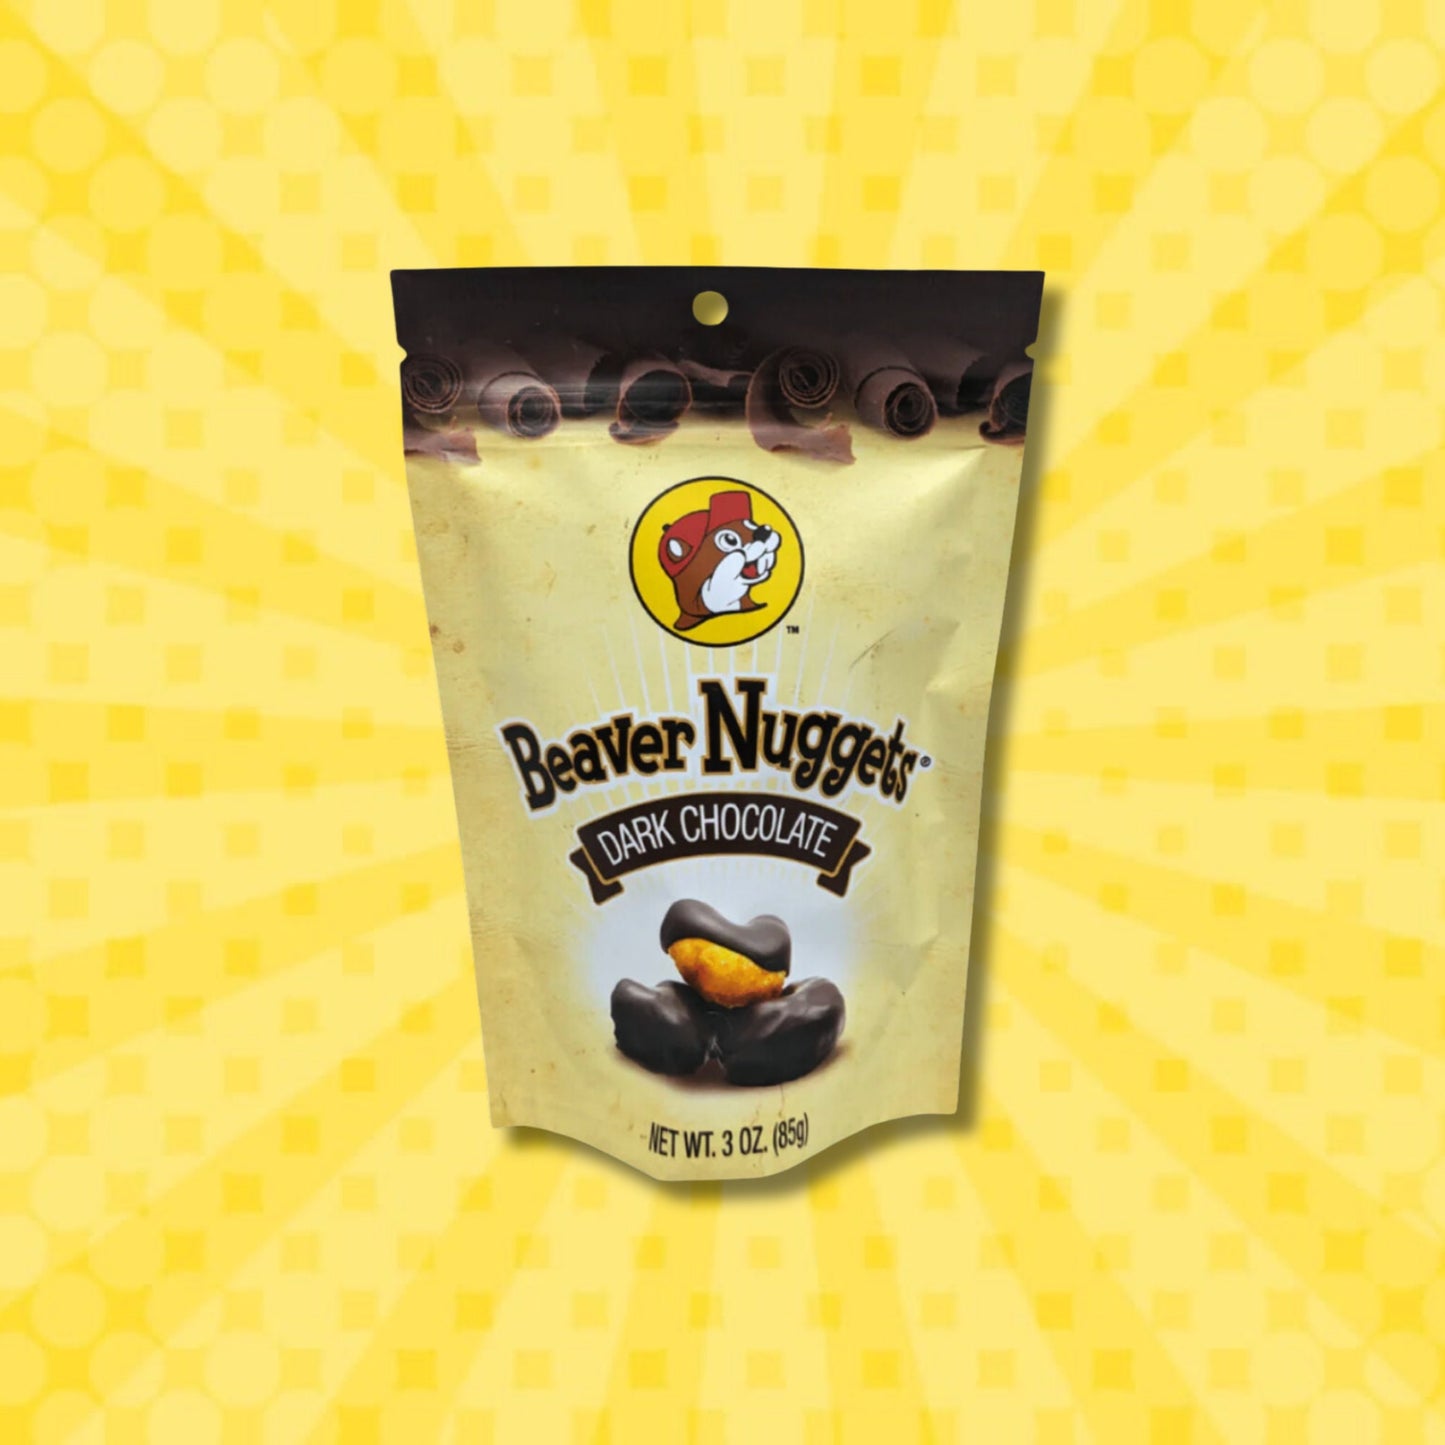 Buc-ee's Chocolate Covered Beaver Nuggets (Dark Chocolate flavor pictured)